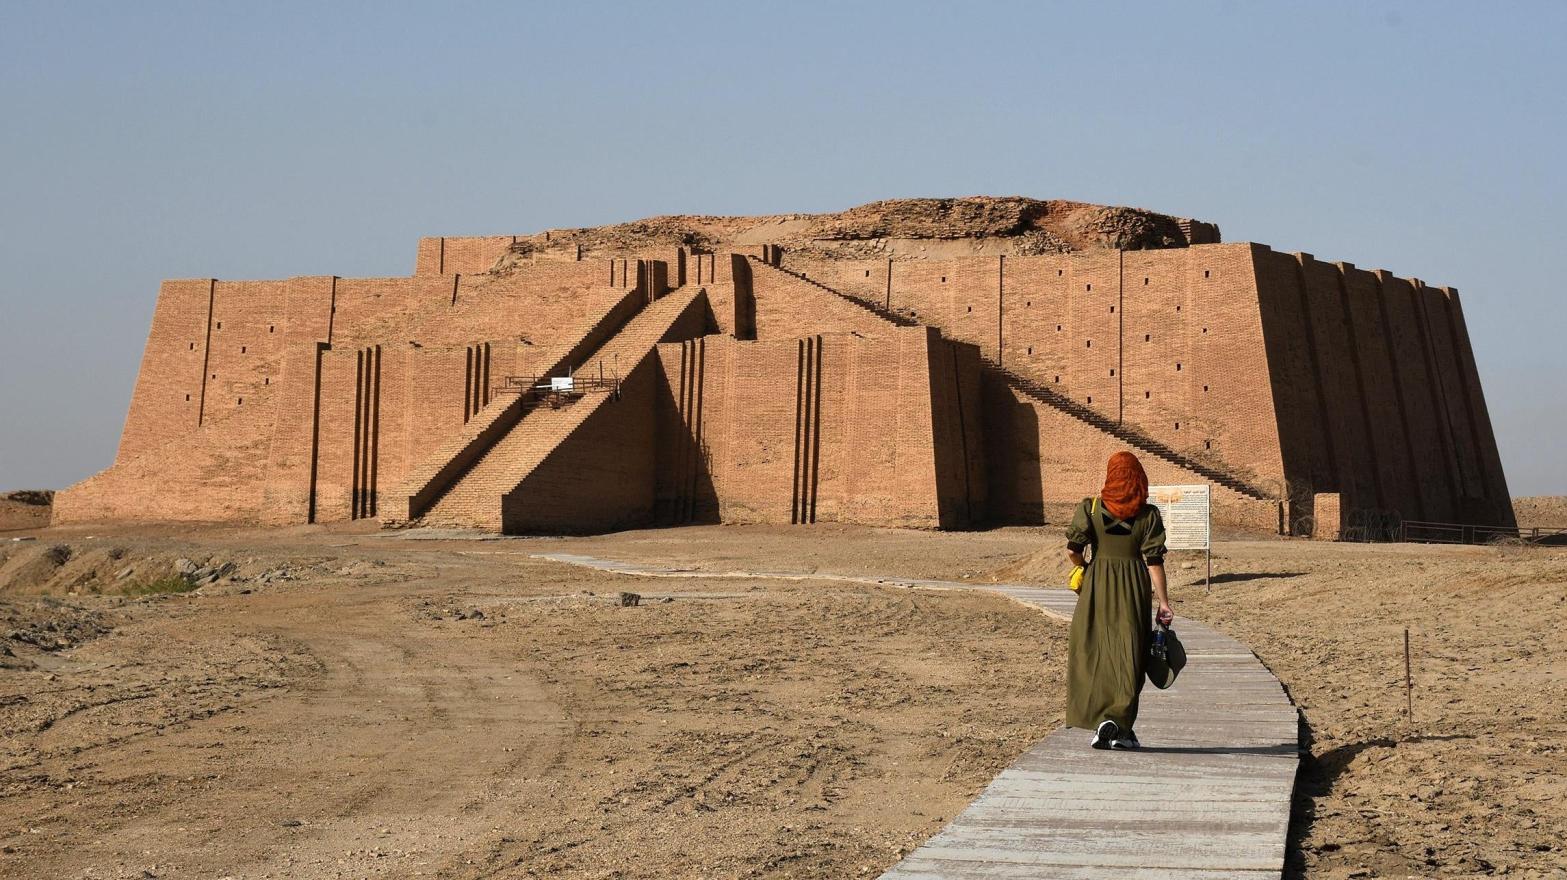 The Sumerian Great Ziggurat temple, in modern-day Iraq. (Photo: Asaad NIAZI / AFP, Getty Images)